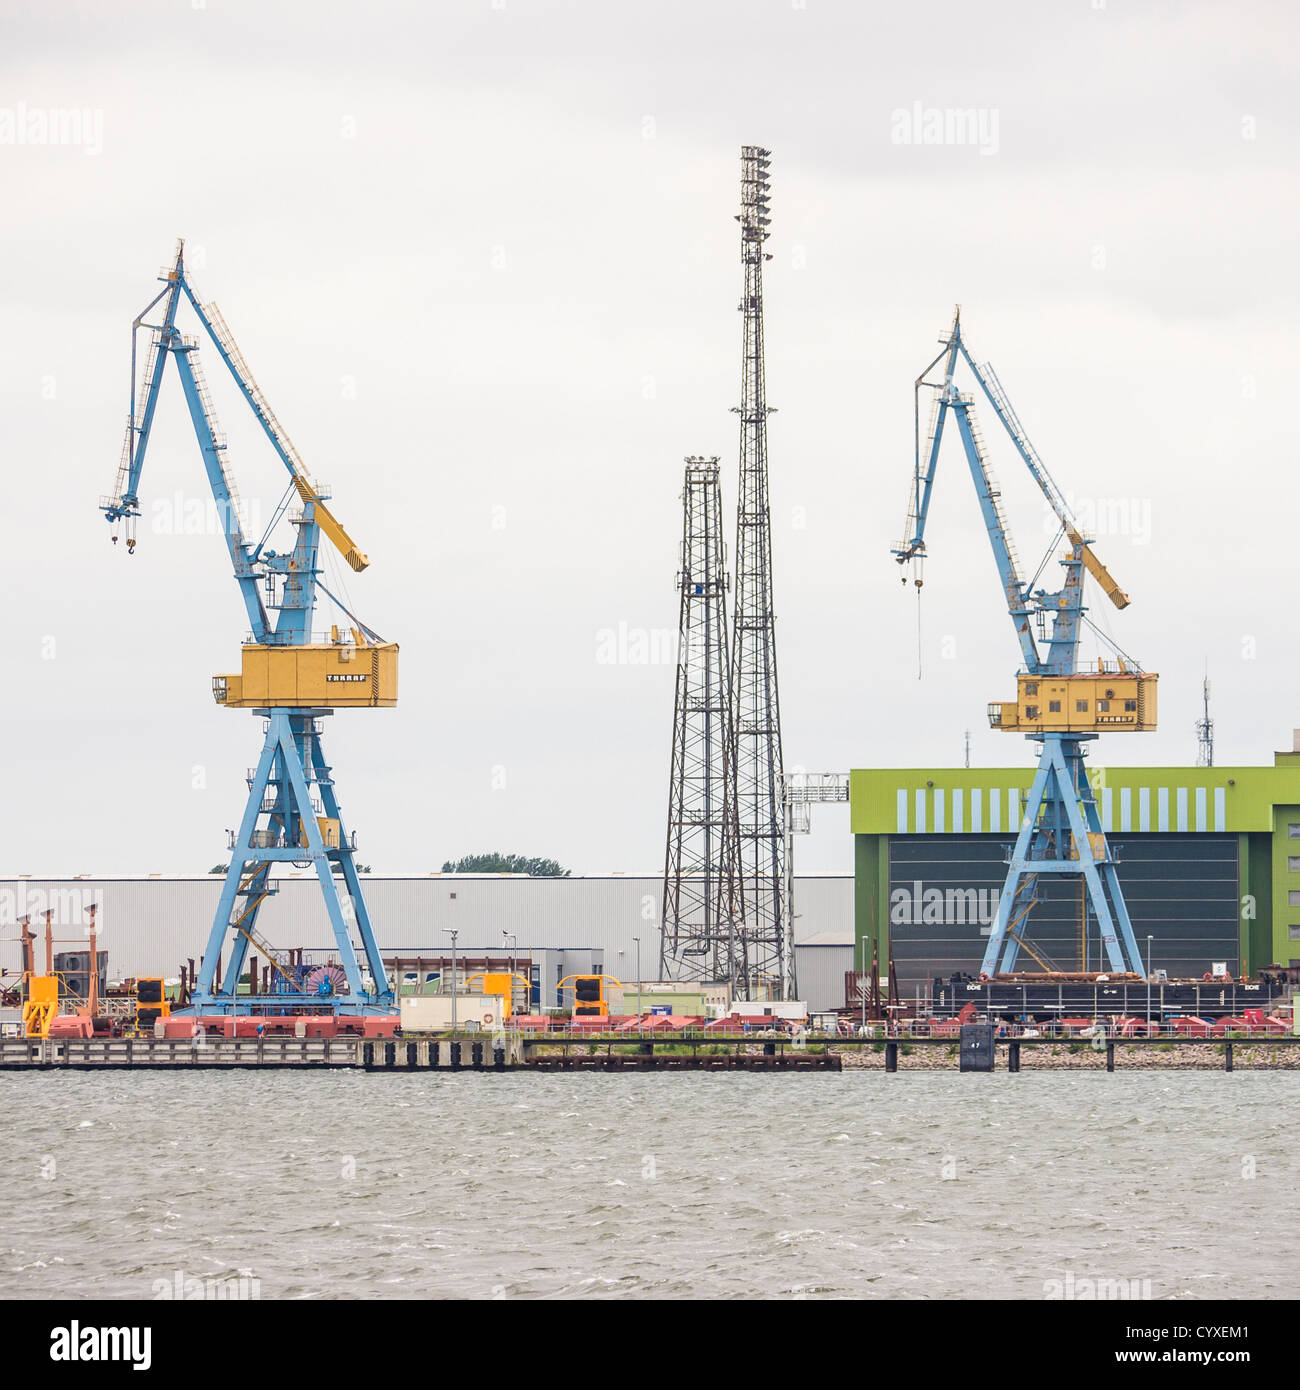 Northern Germany, View of loading docks with crane Stock Photo